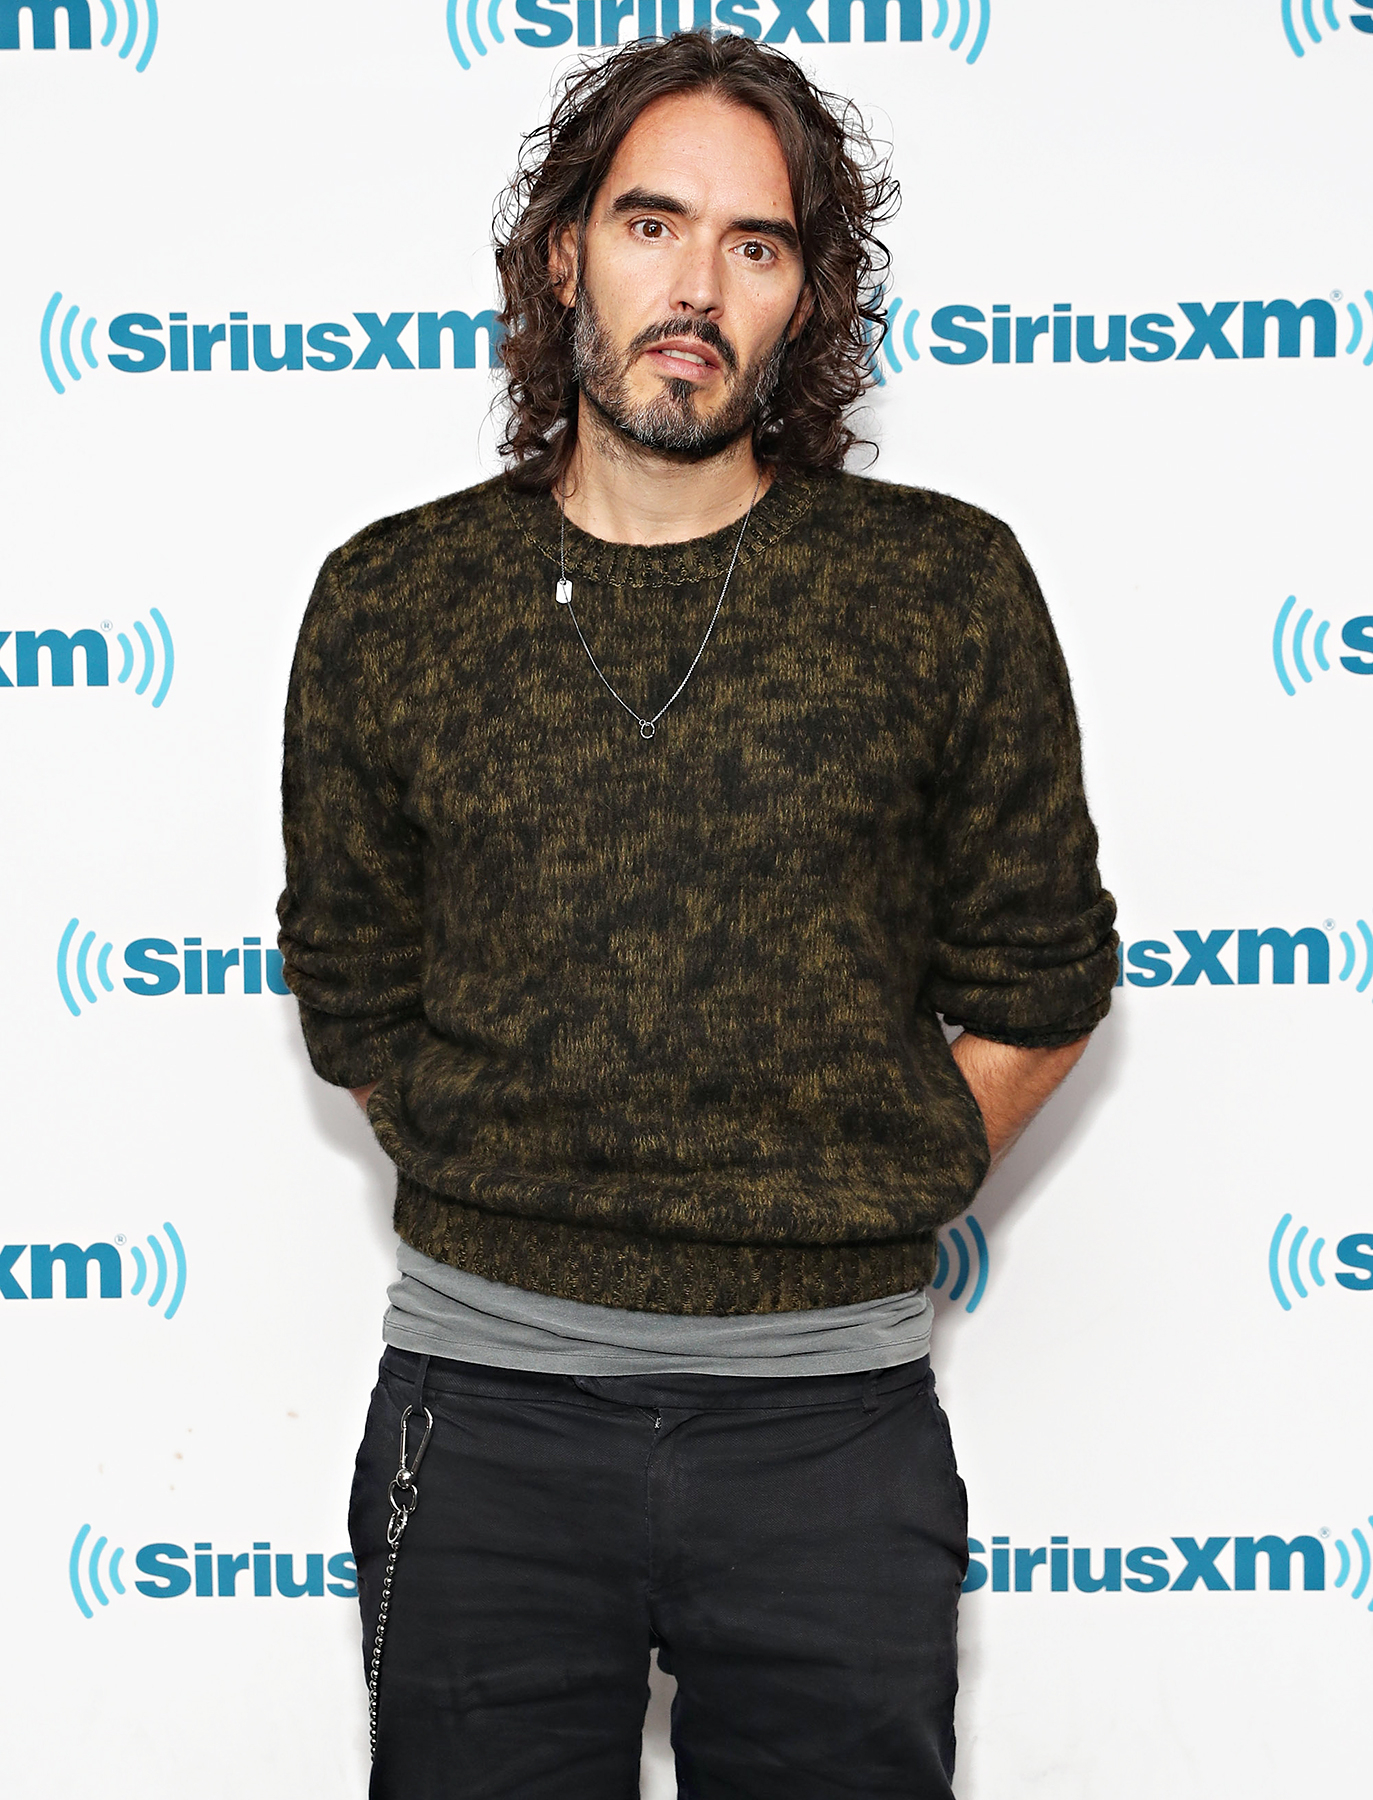 Russell Brand on Heroin, Sex Addiction and Katy Perry